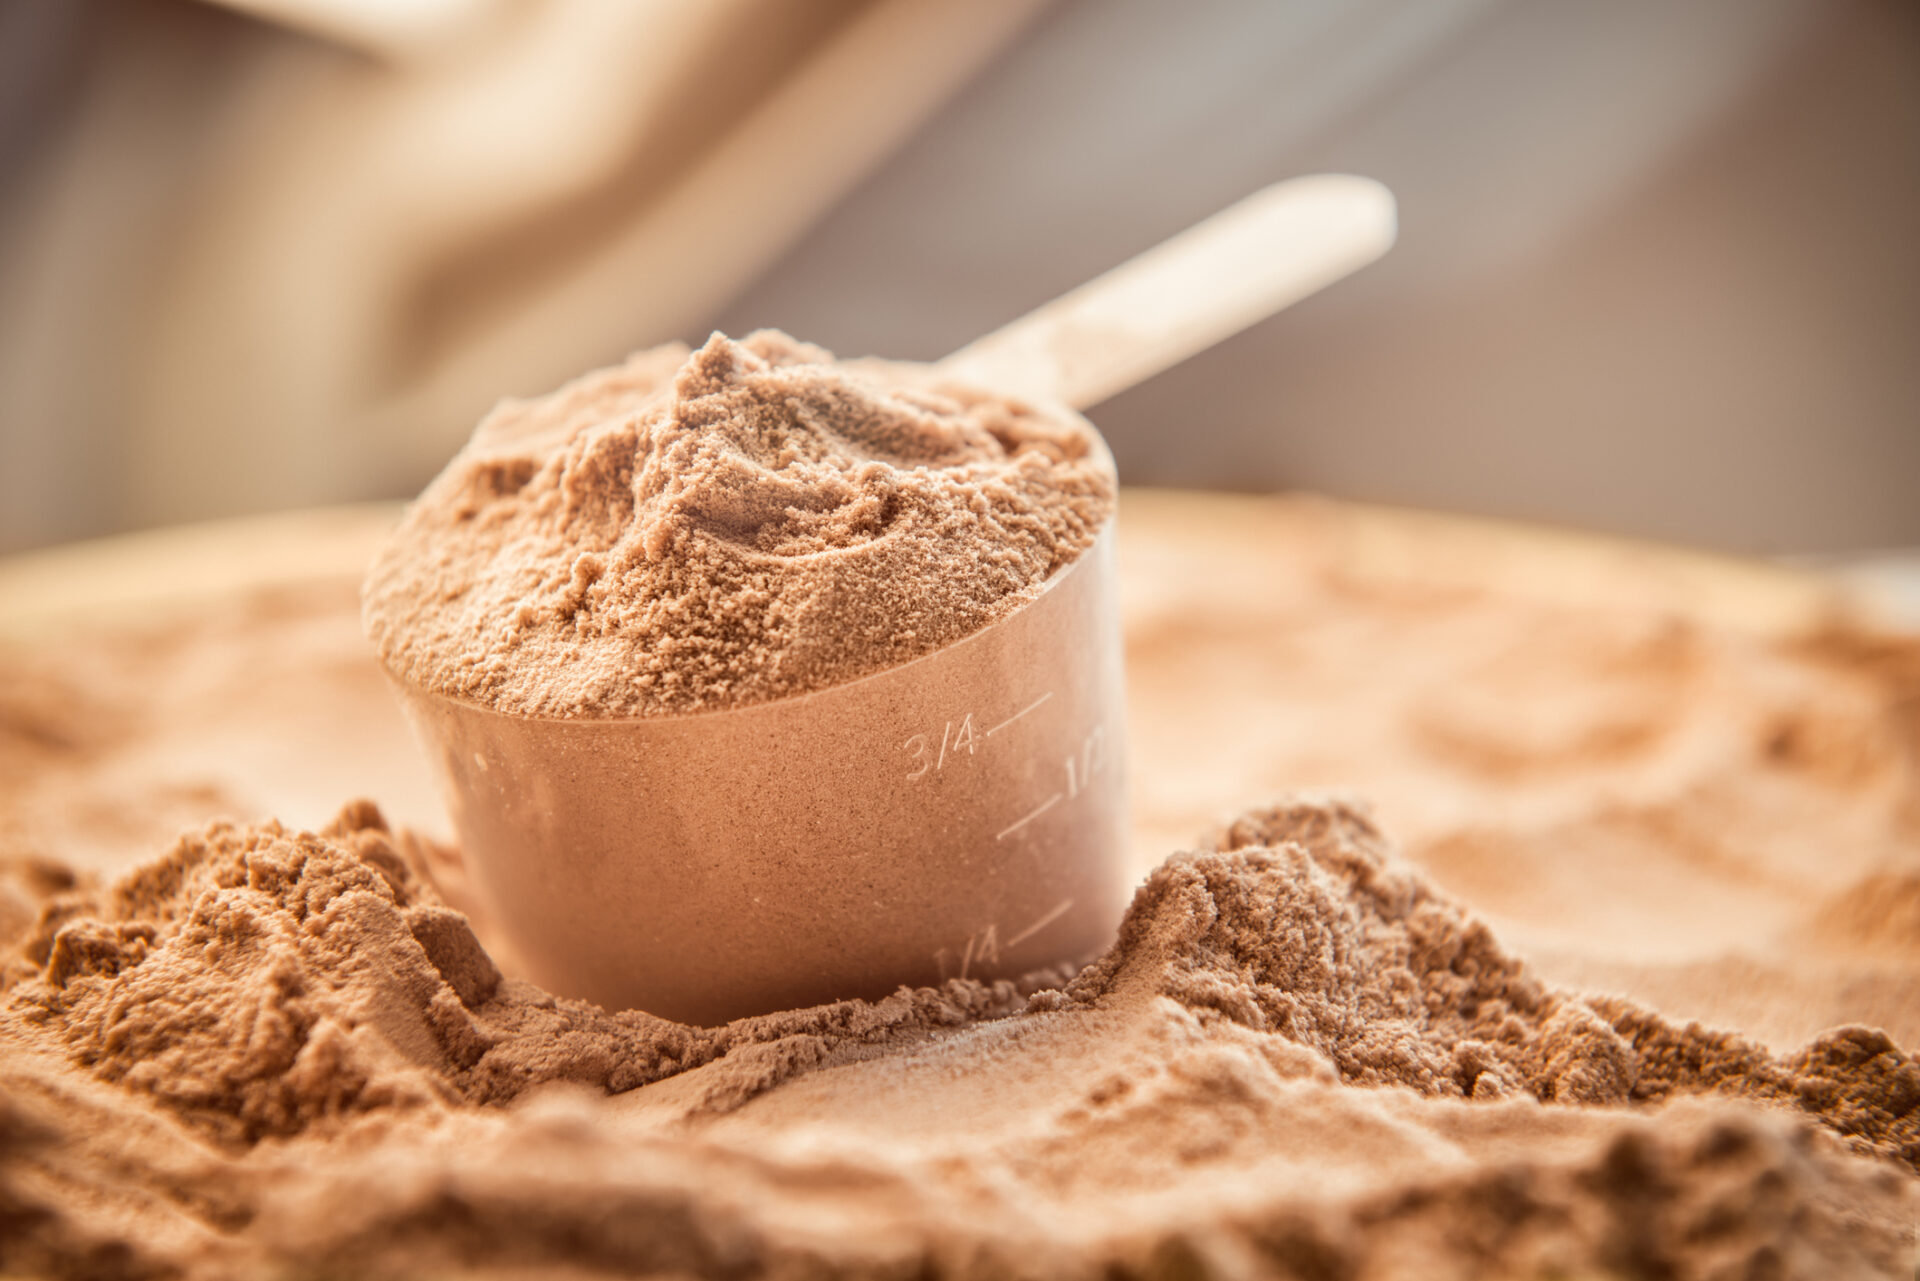 Pure Whey Protein Market Future Aspect Analysis and Current Trends by 2017 to 2032